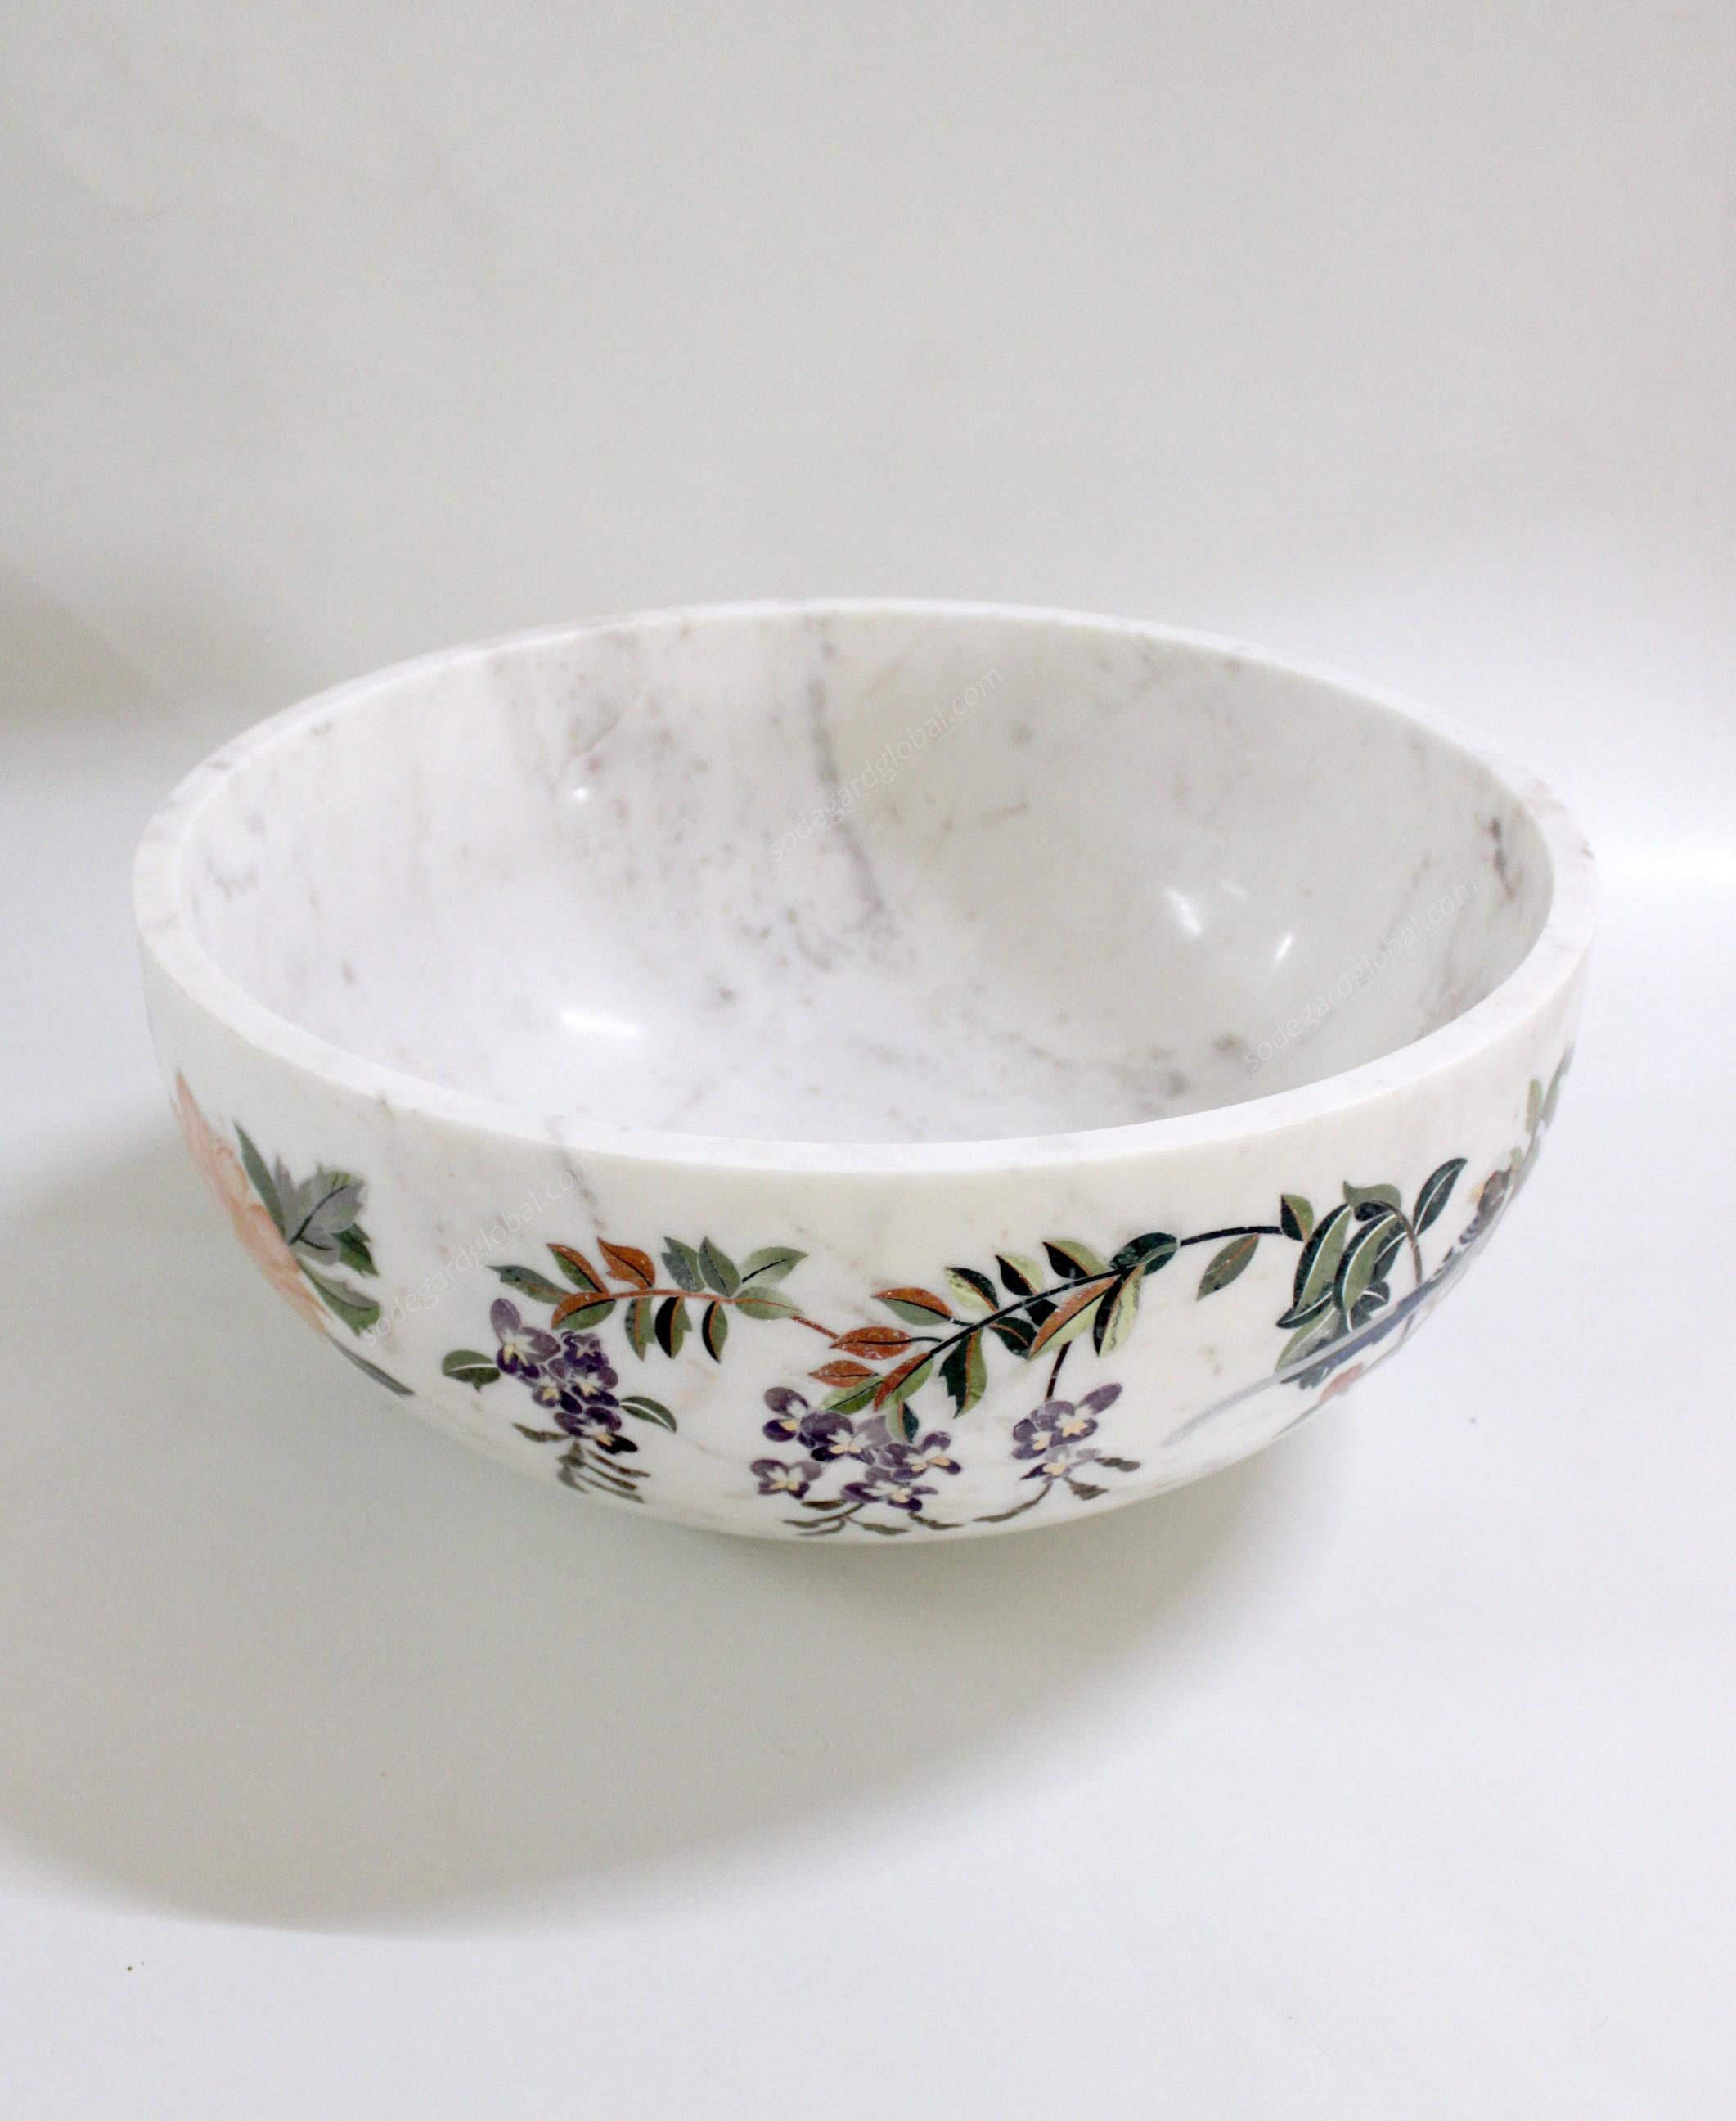 Handmade Ornamenti Bowl Inlay in White Marble by Stephanie Odegard For Sale 1